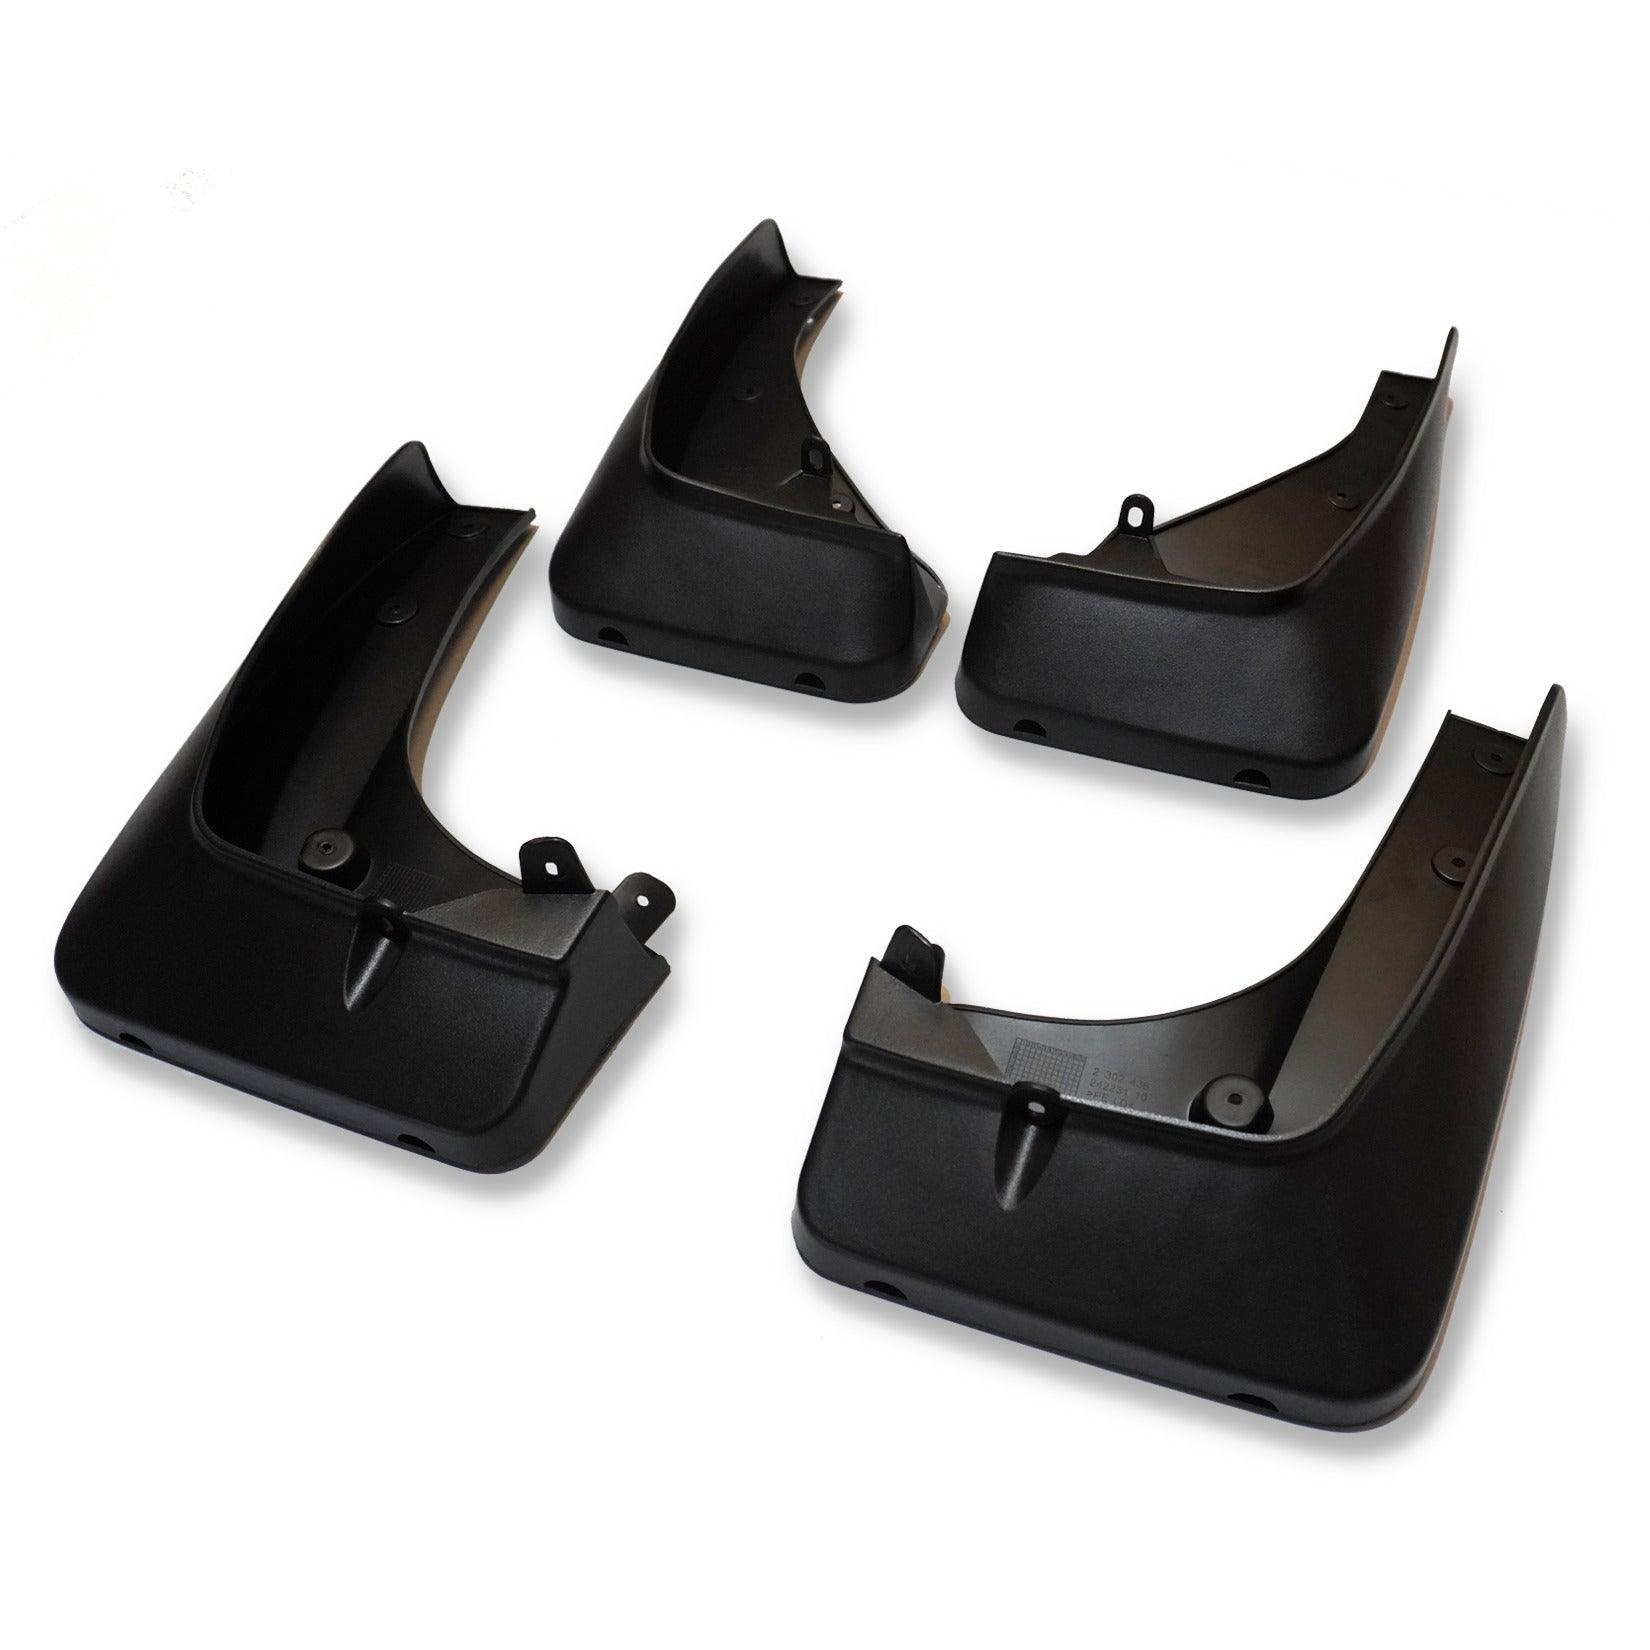 BMW X5 F15 2014-2018 OE STYLE MUD FLAP SET - FOR MODELS WITHOUT SIDE STEPS - Storm Xccessories2